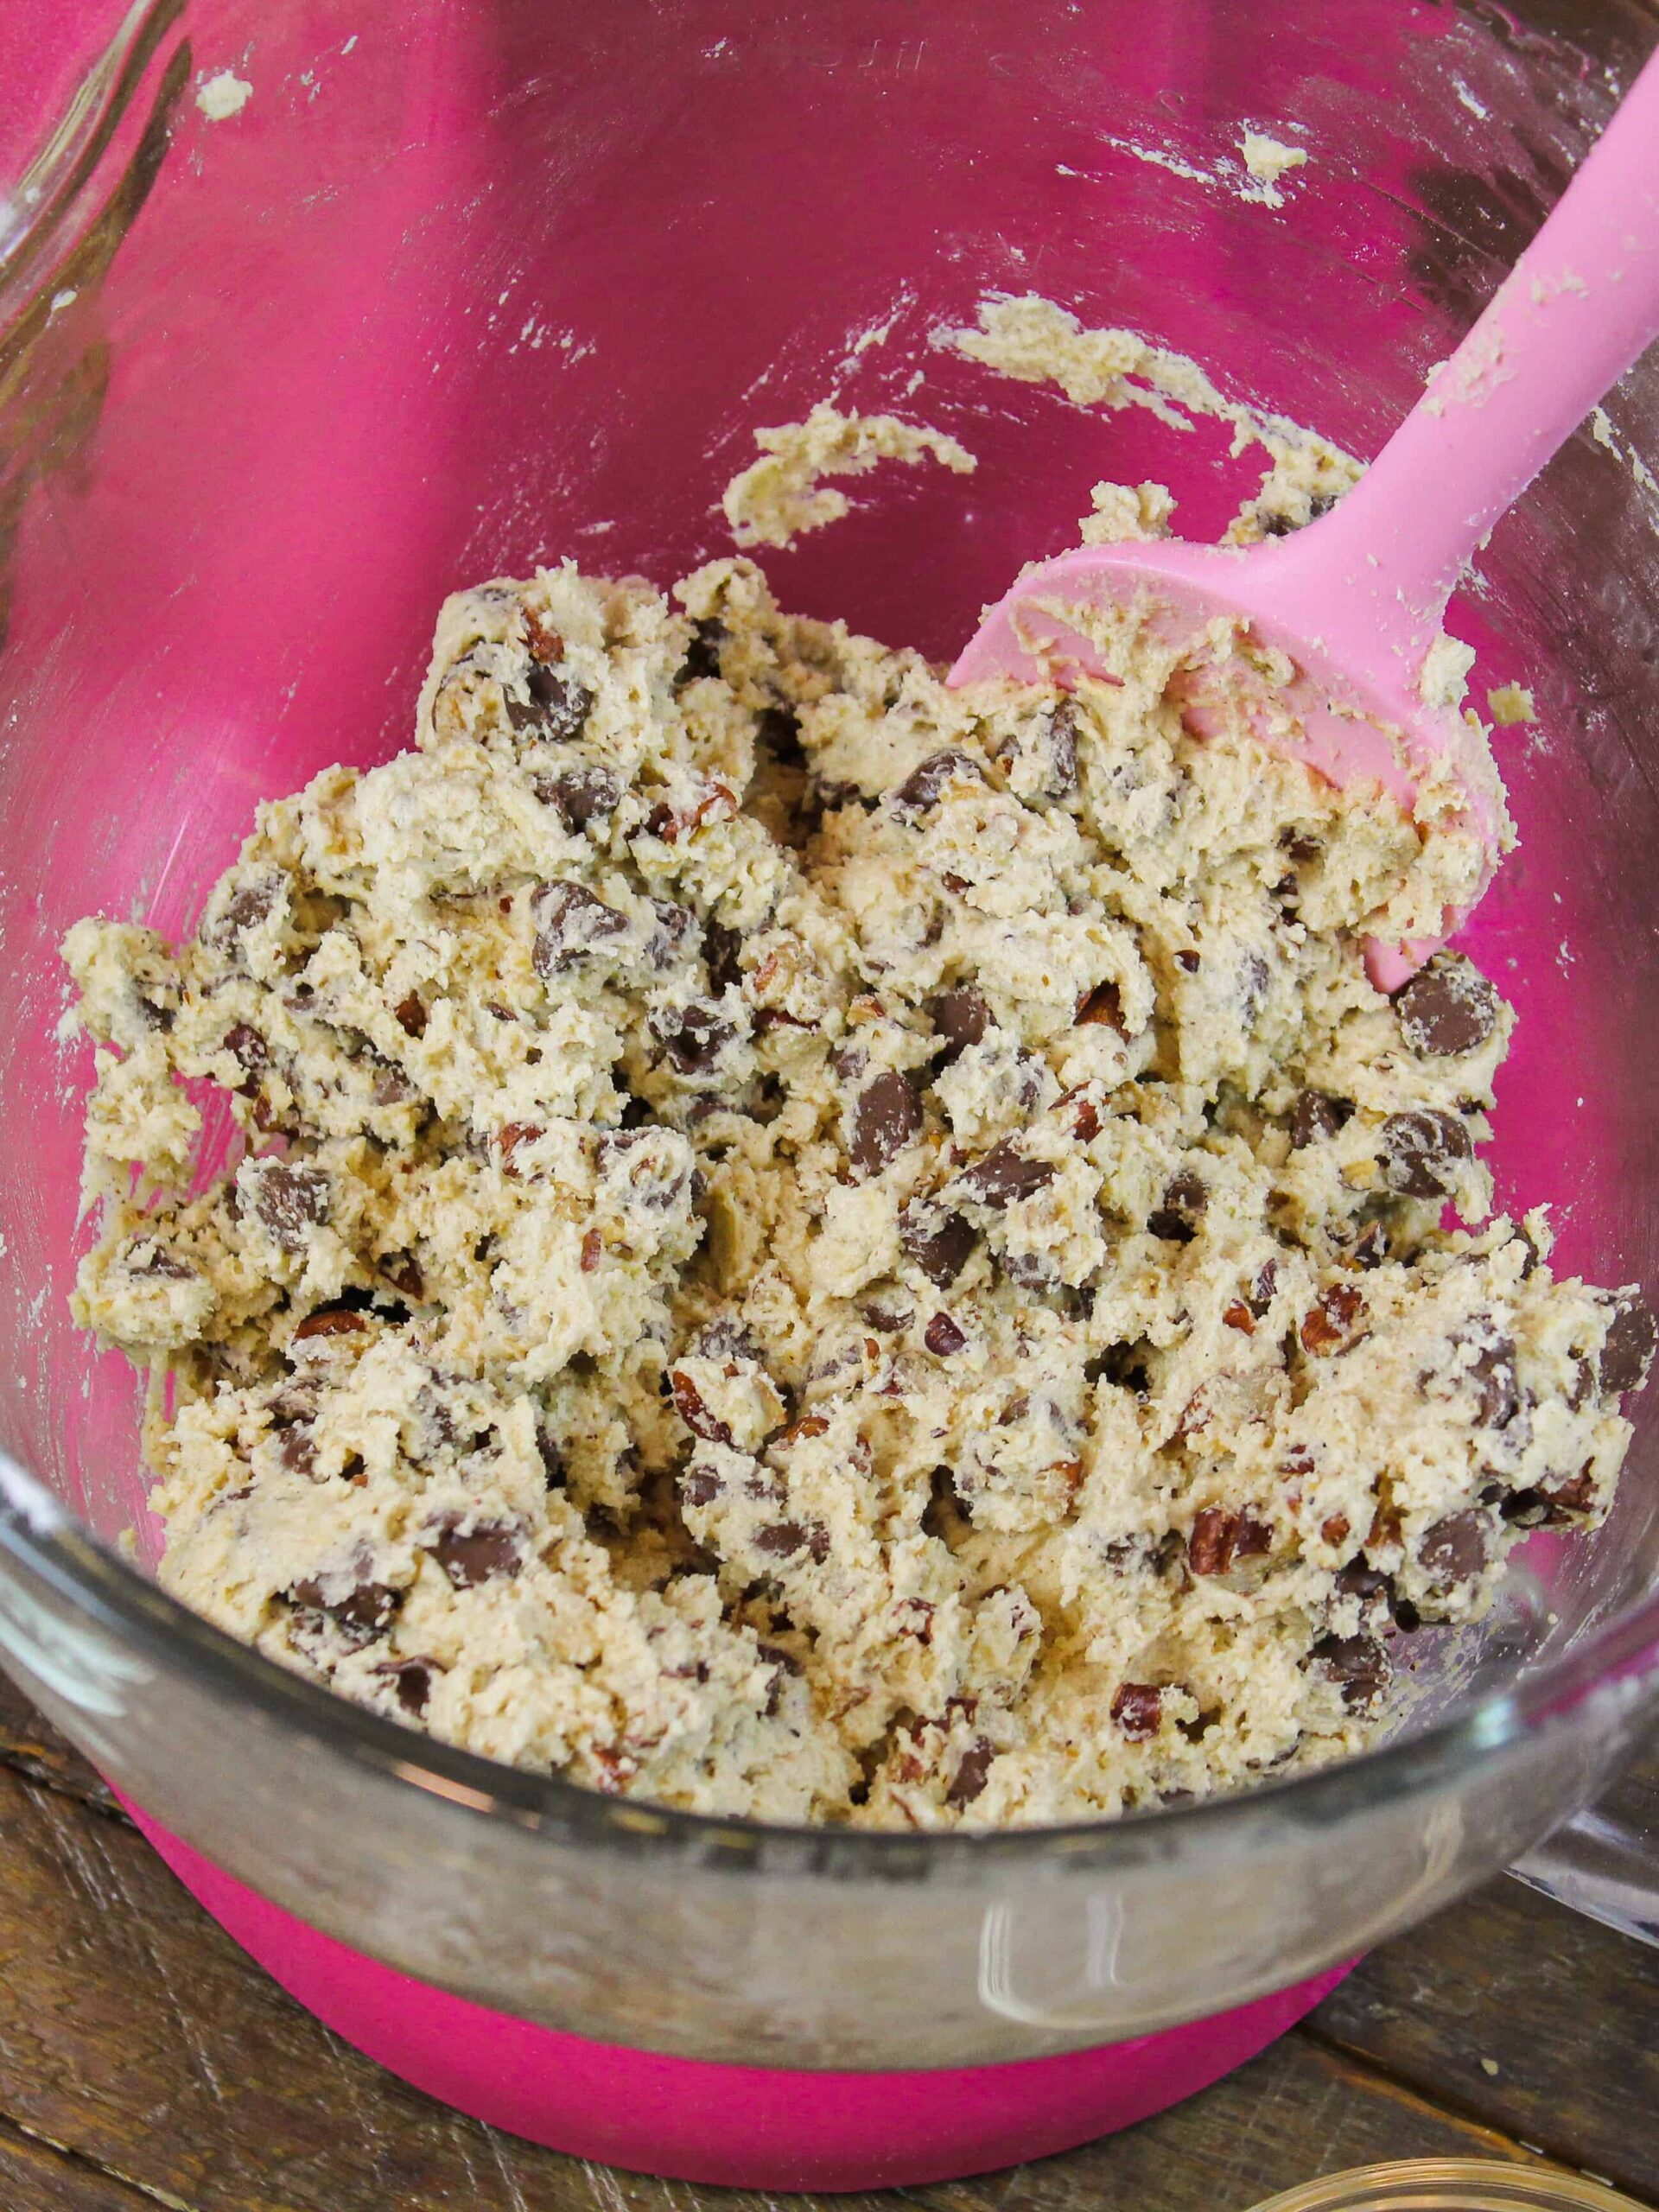 image of doubletree cookie dough ready to be scooped and baked